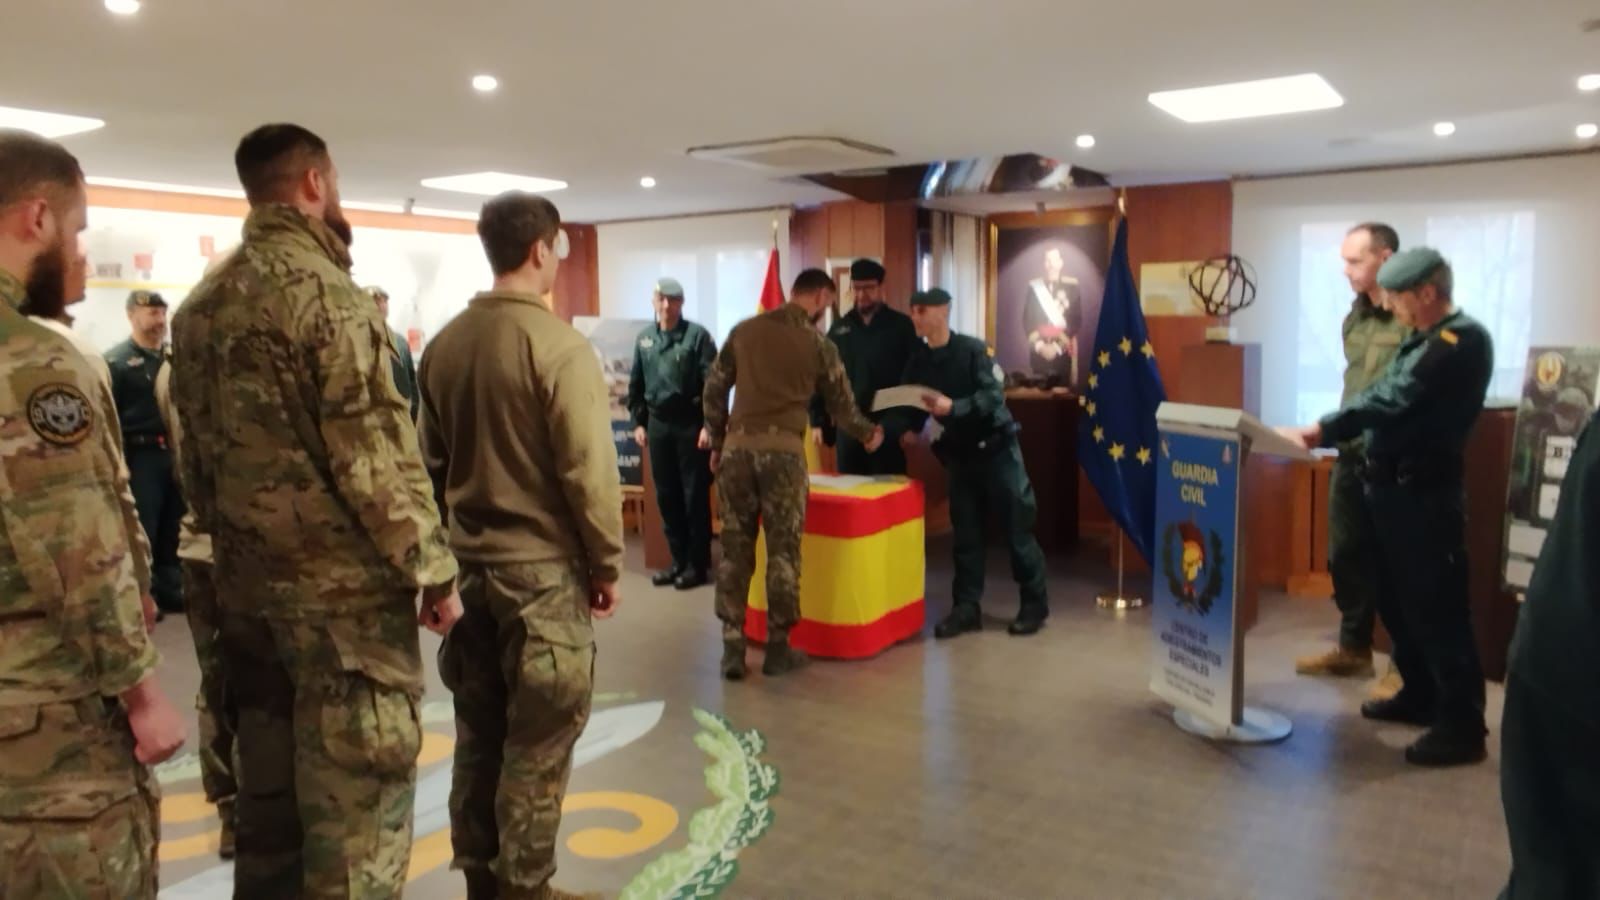 Closing ceremony of the course given by Guardia Civil